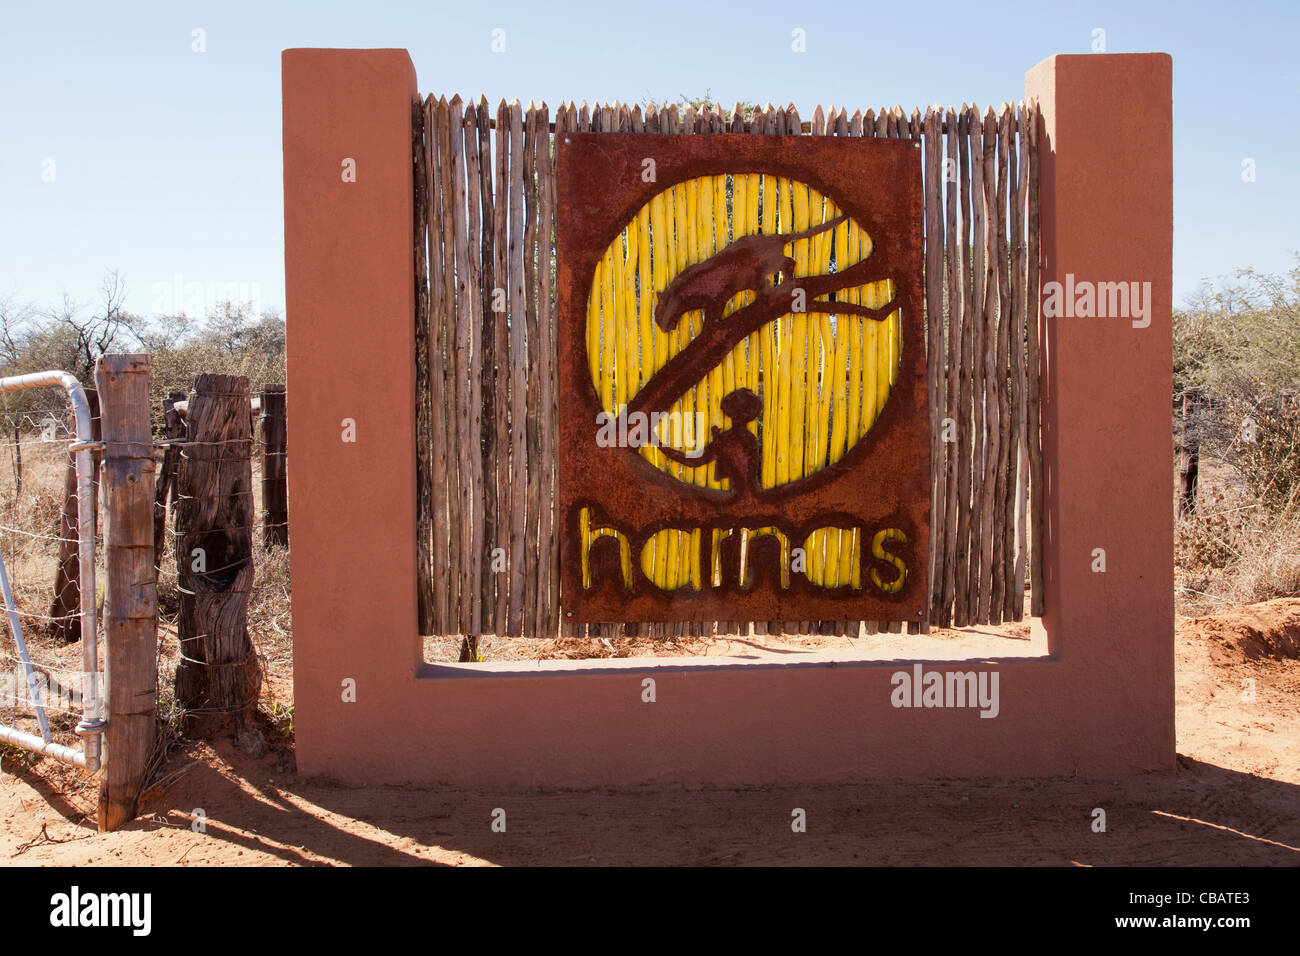 Africa, Namibia, Harnas, Harnas Wildlife Foundation and Guest Farm. Entrance sign sporting the Harnas logo Stock Photo